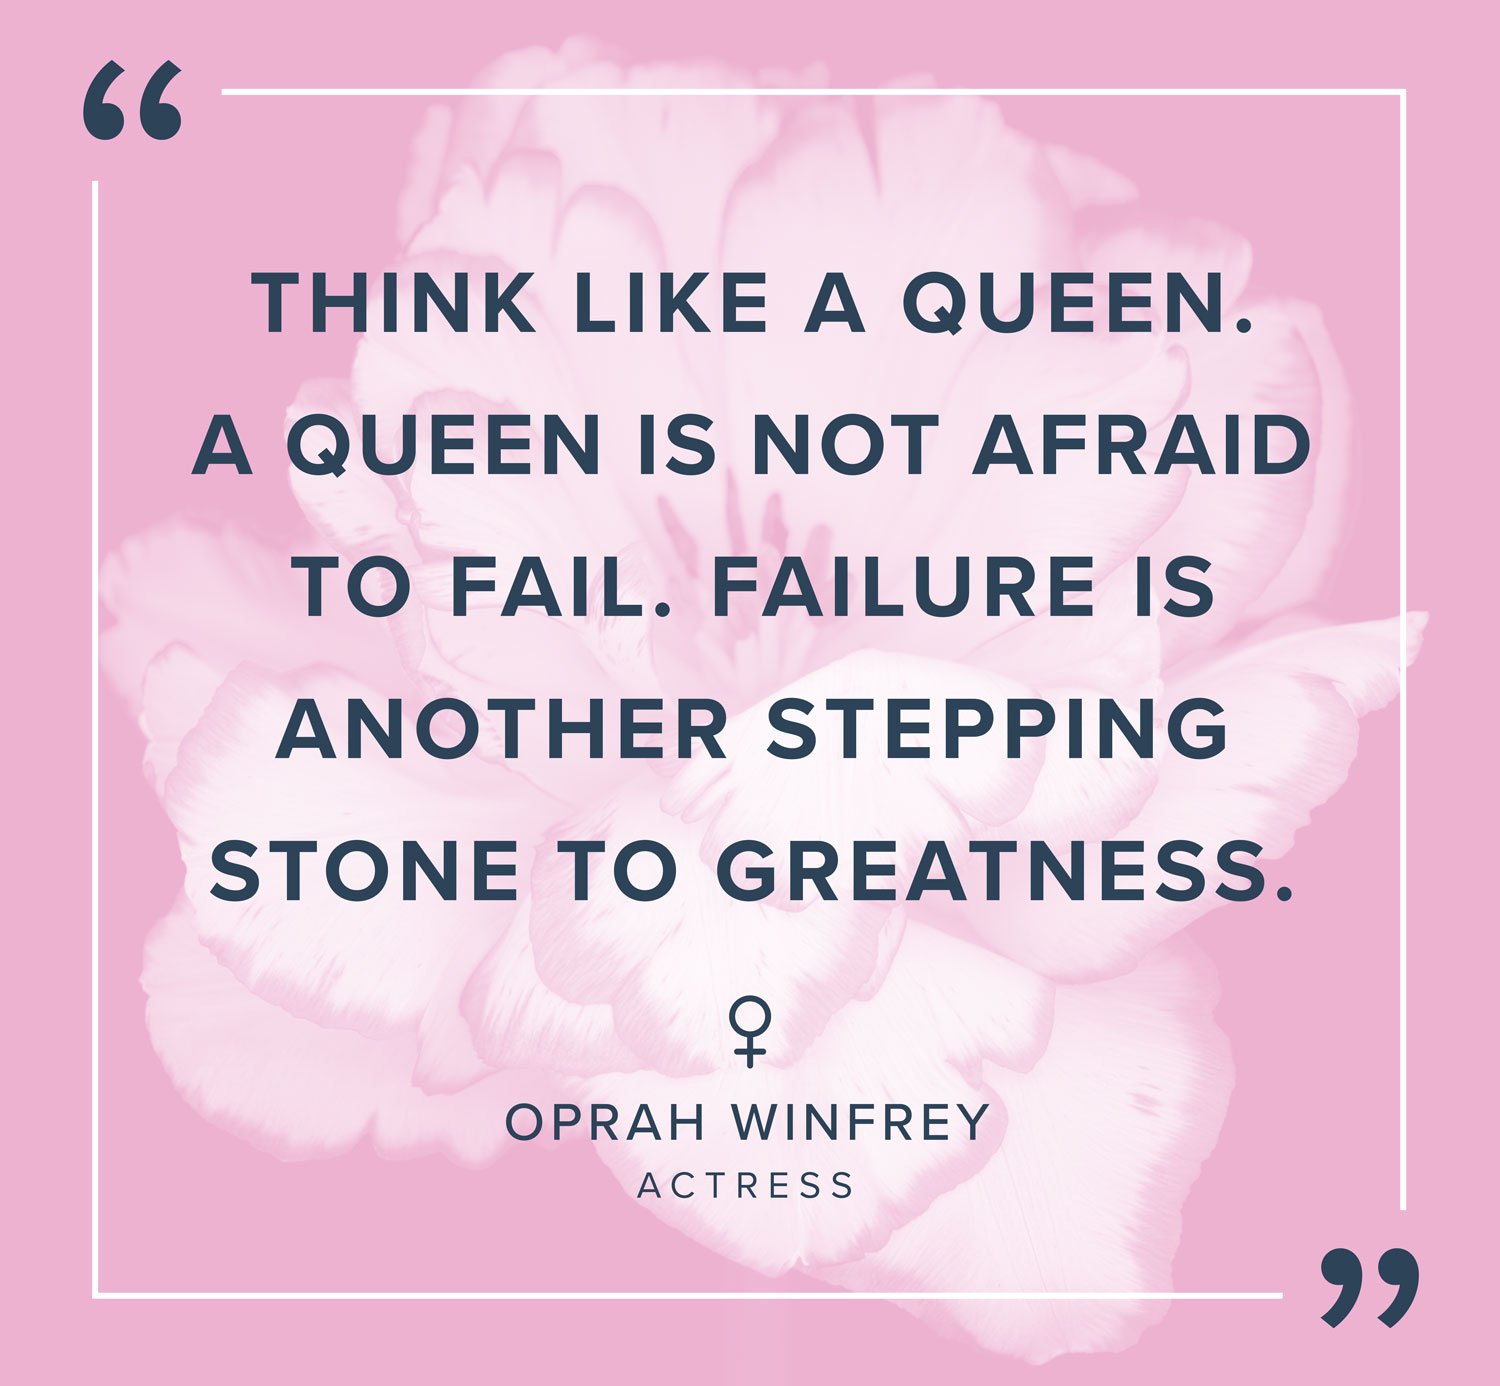 50 Empowering Quotes For Women Proflowers